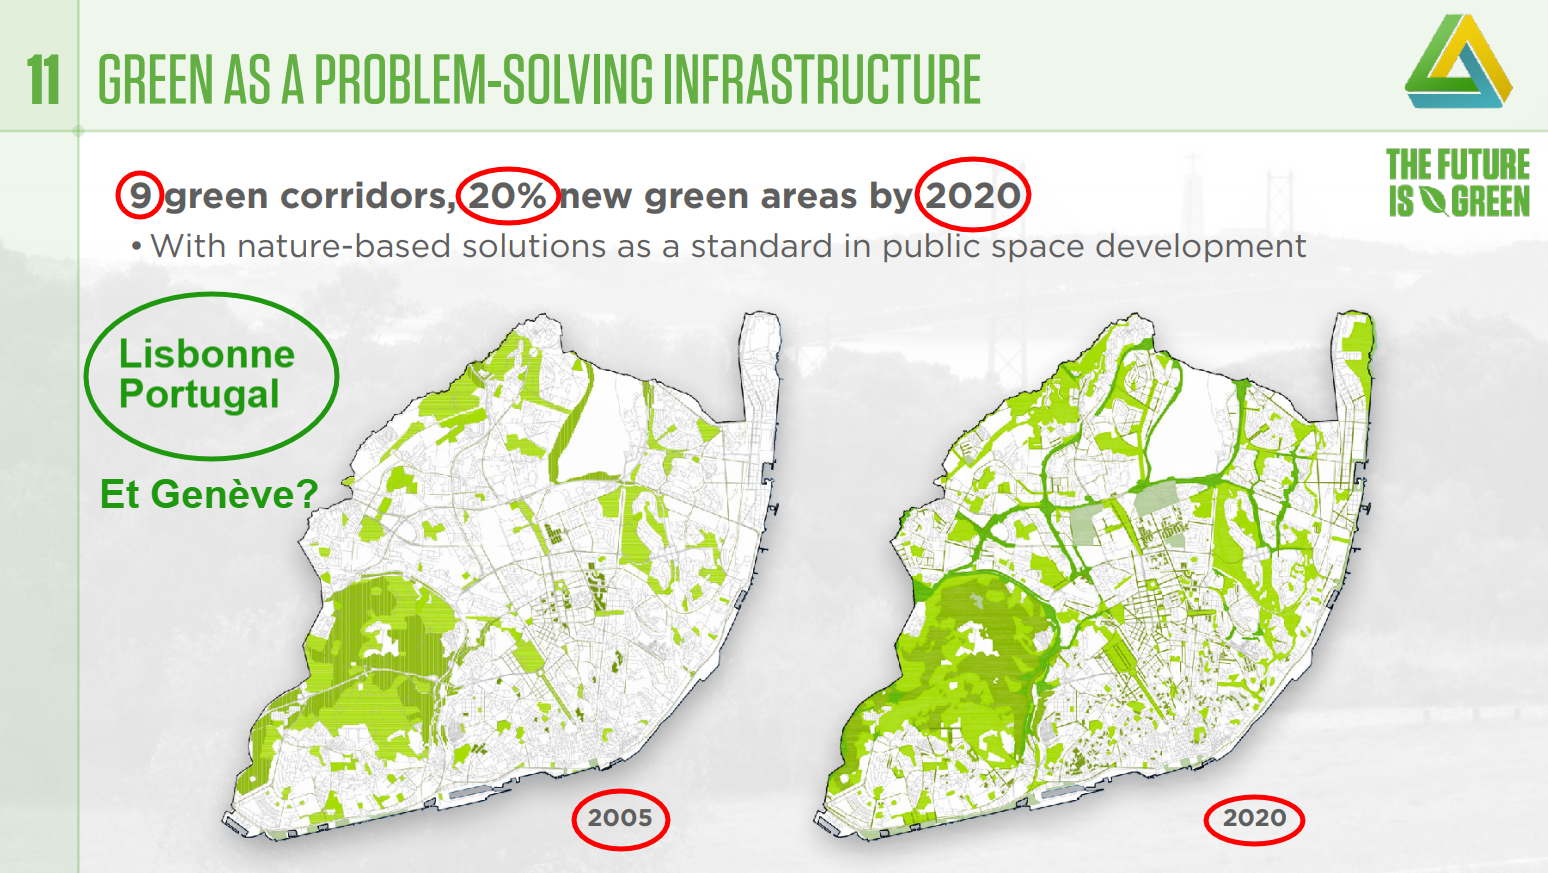 Green as a problem-solving infrastructure